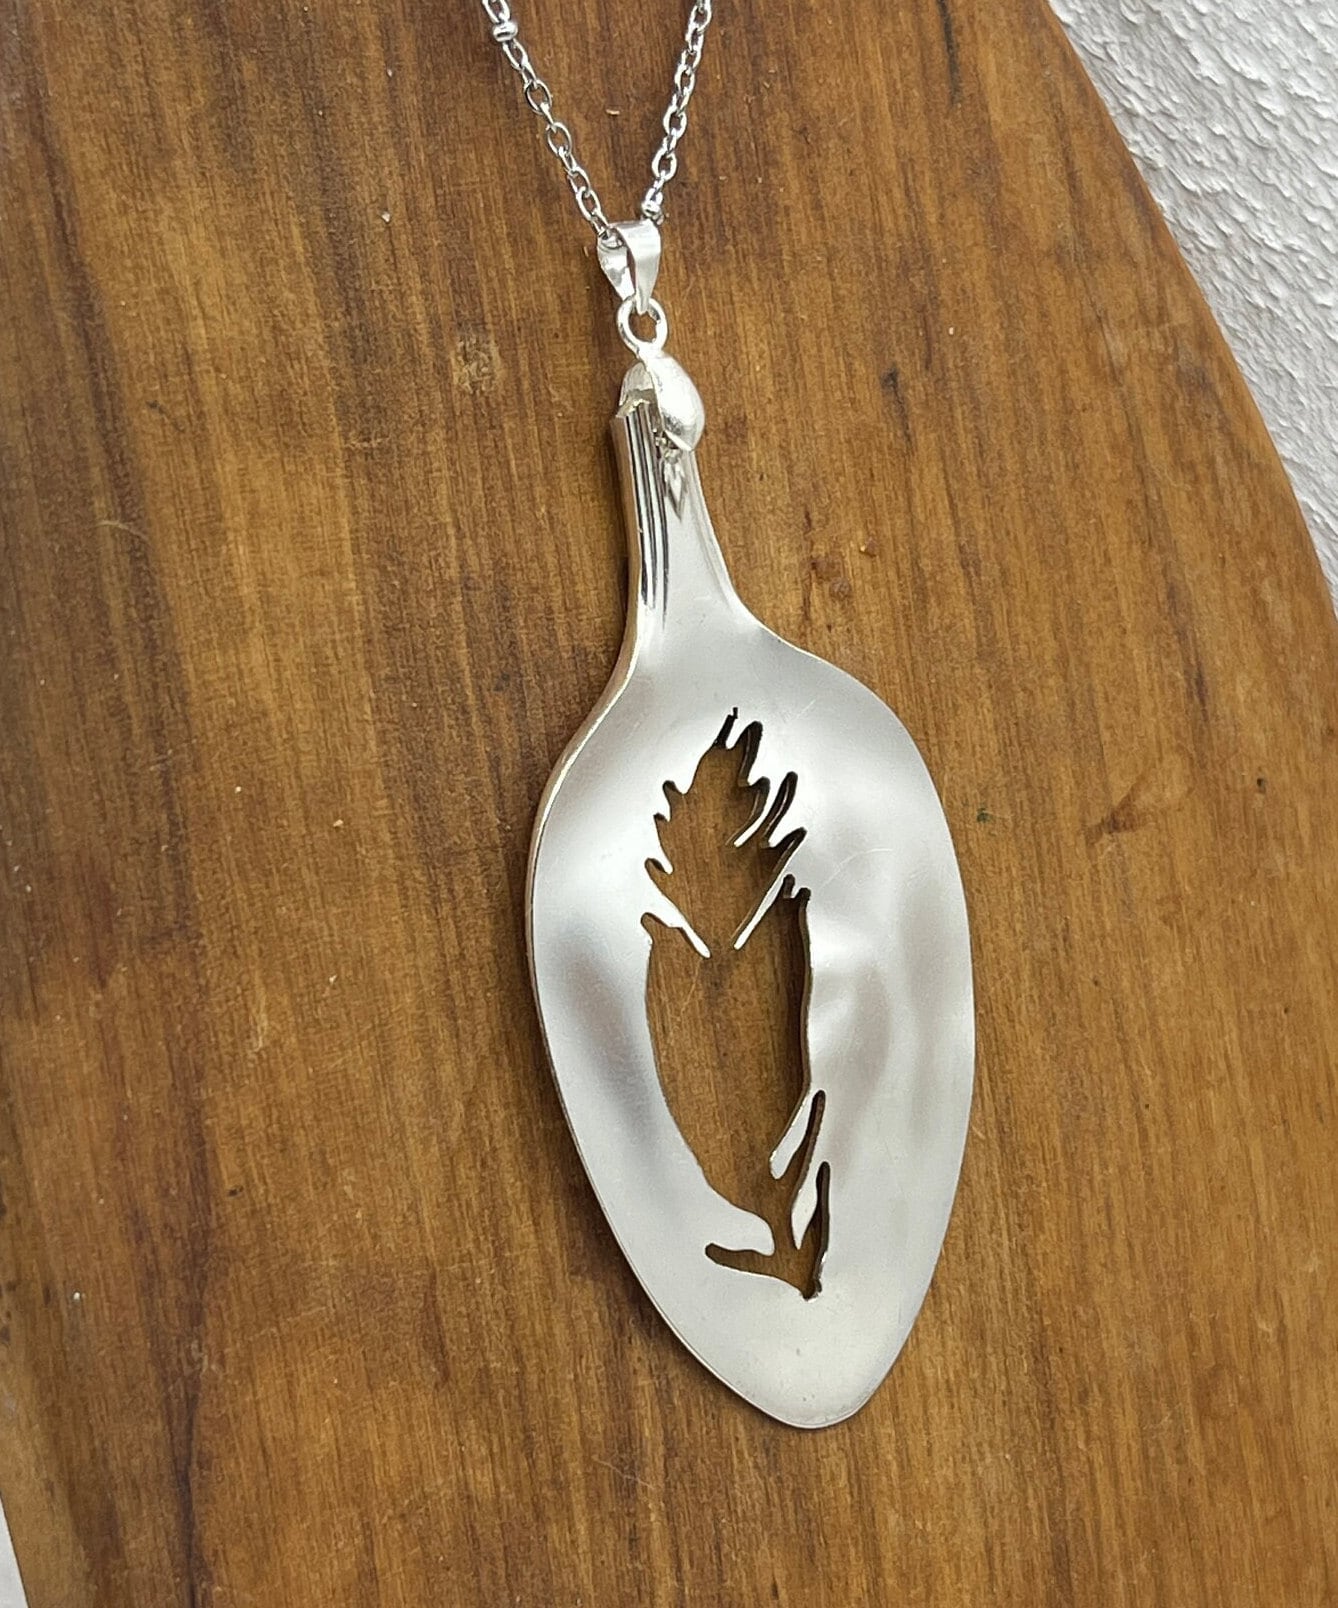 Silver Feather Necklace made from Vintage Repurposed Spoon Bowl, Hand Drawn and Hand Cut Design, Handmade Silverware Jewelry